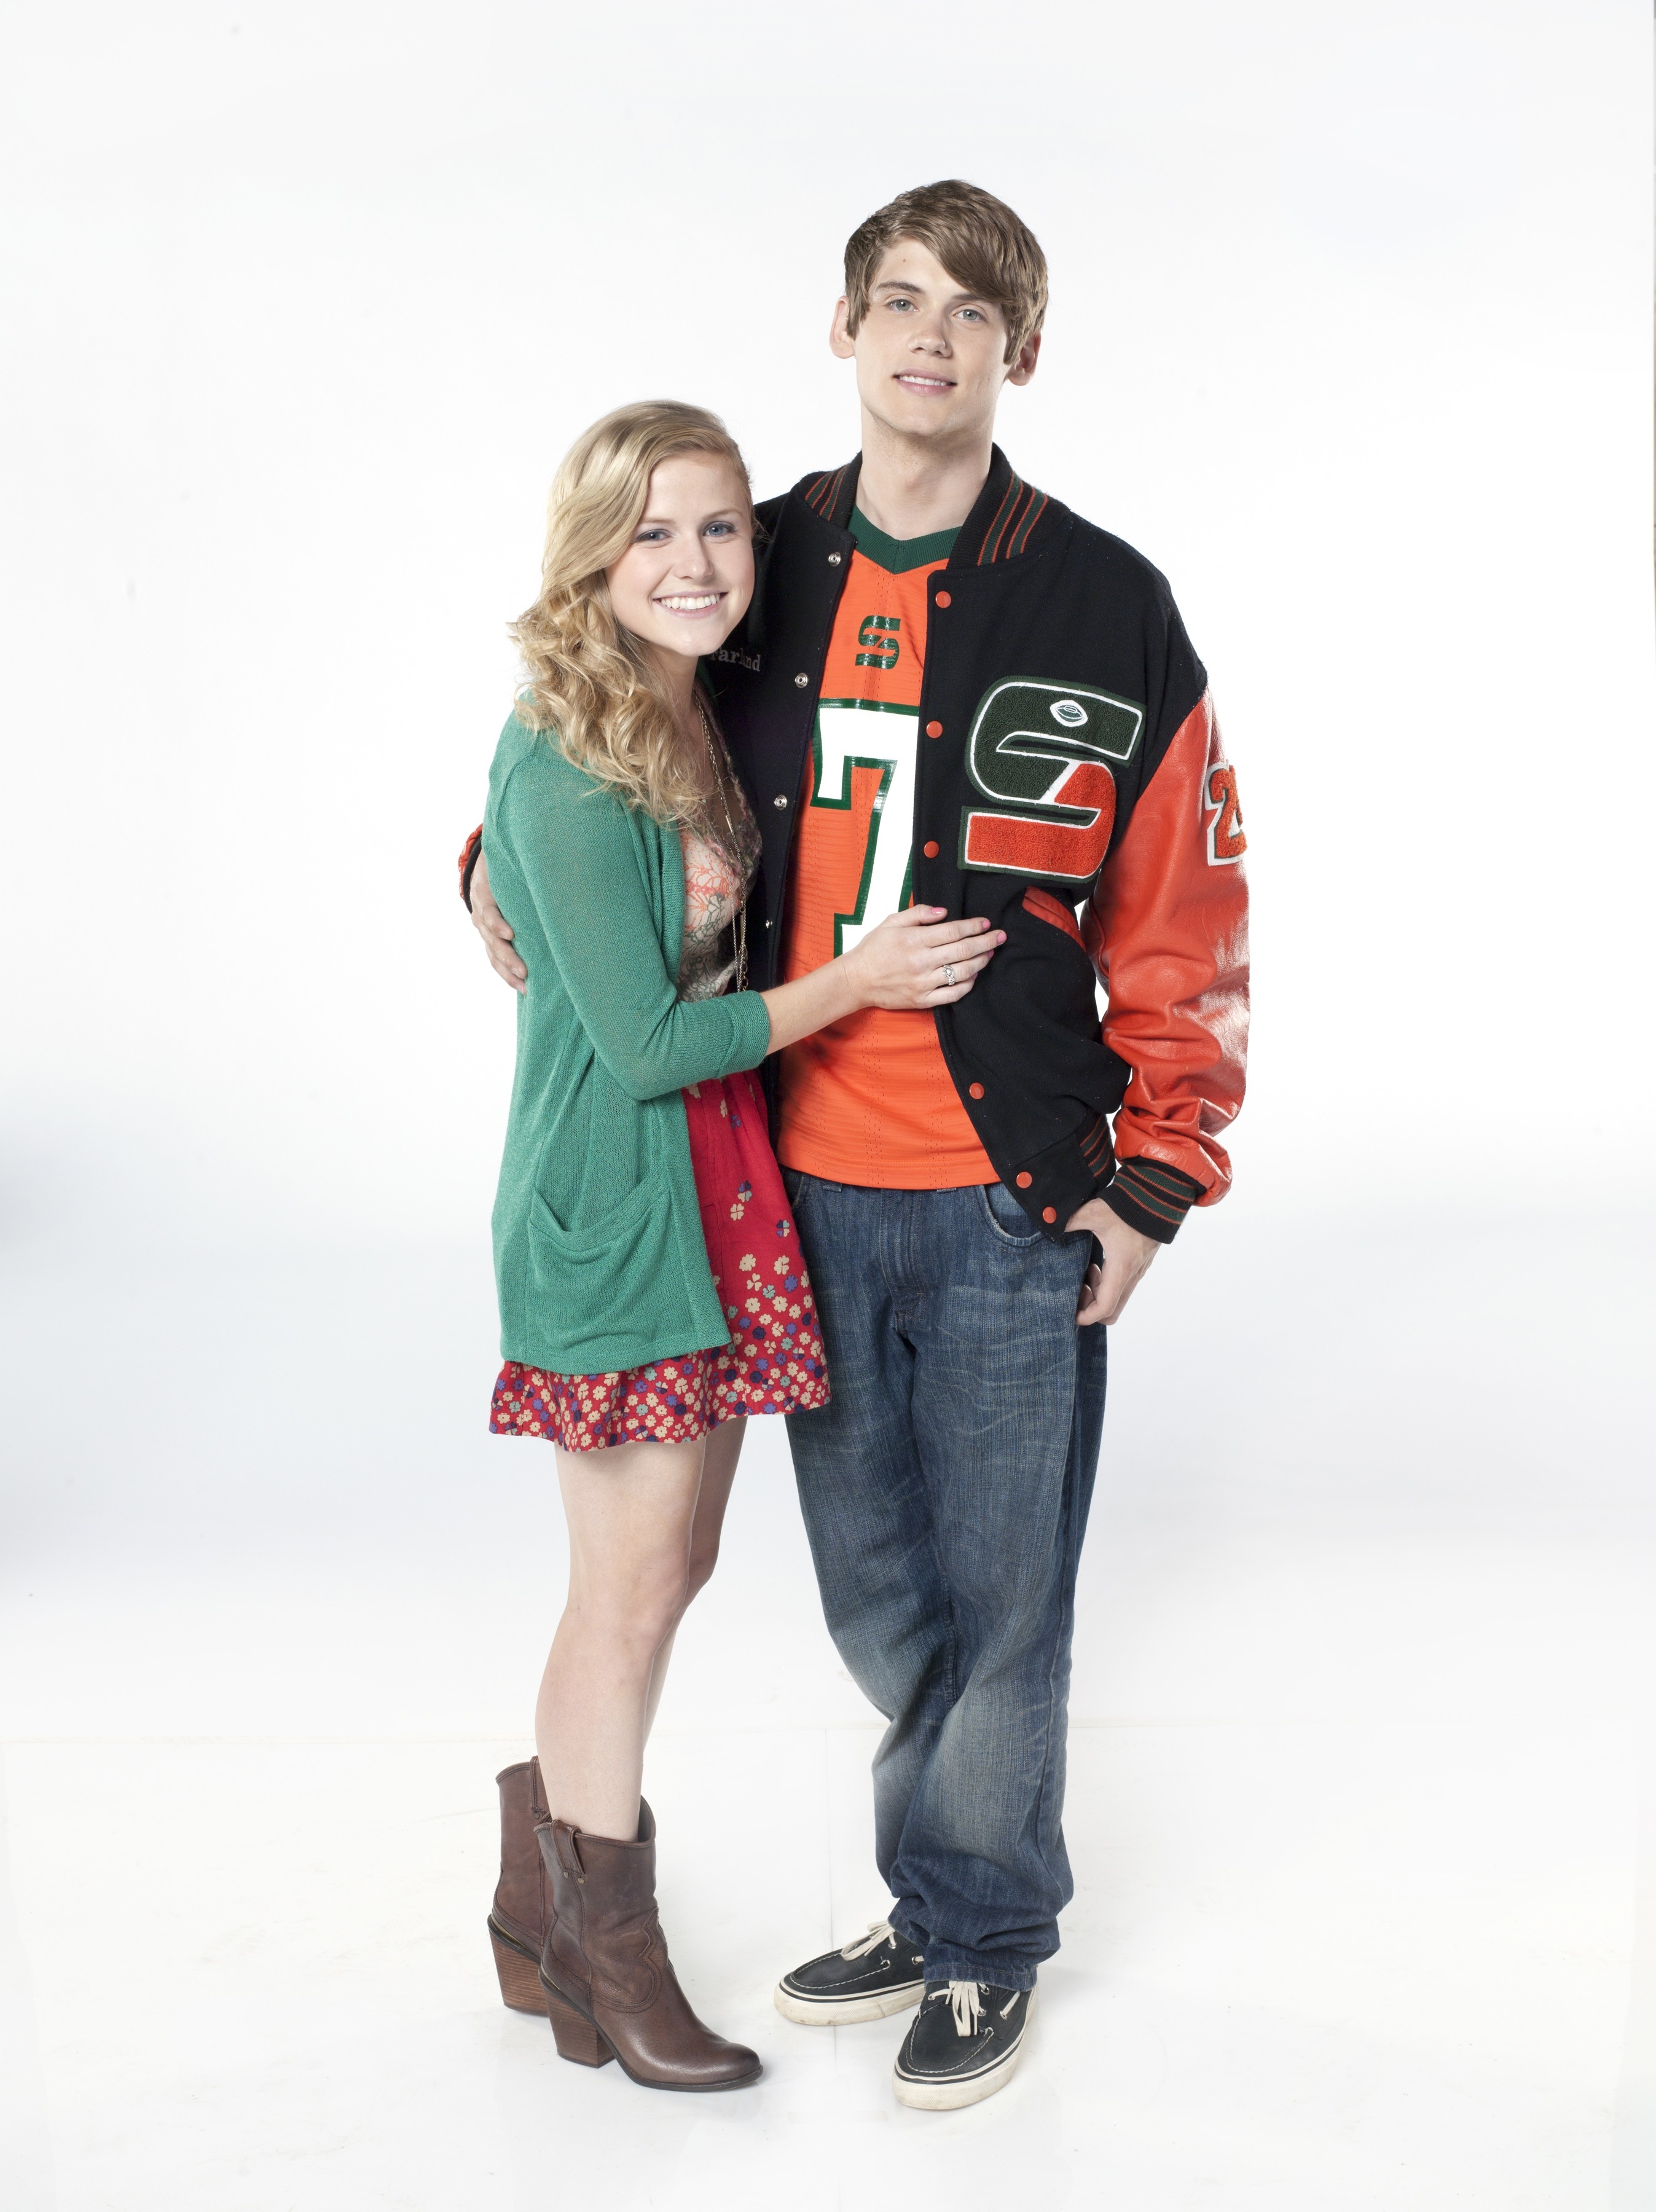 Erin Smith as Chrissy with Tony Oller as Tyler, Field of Vision